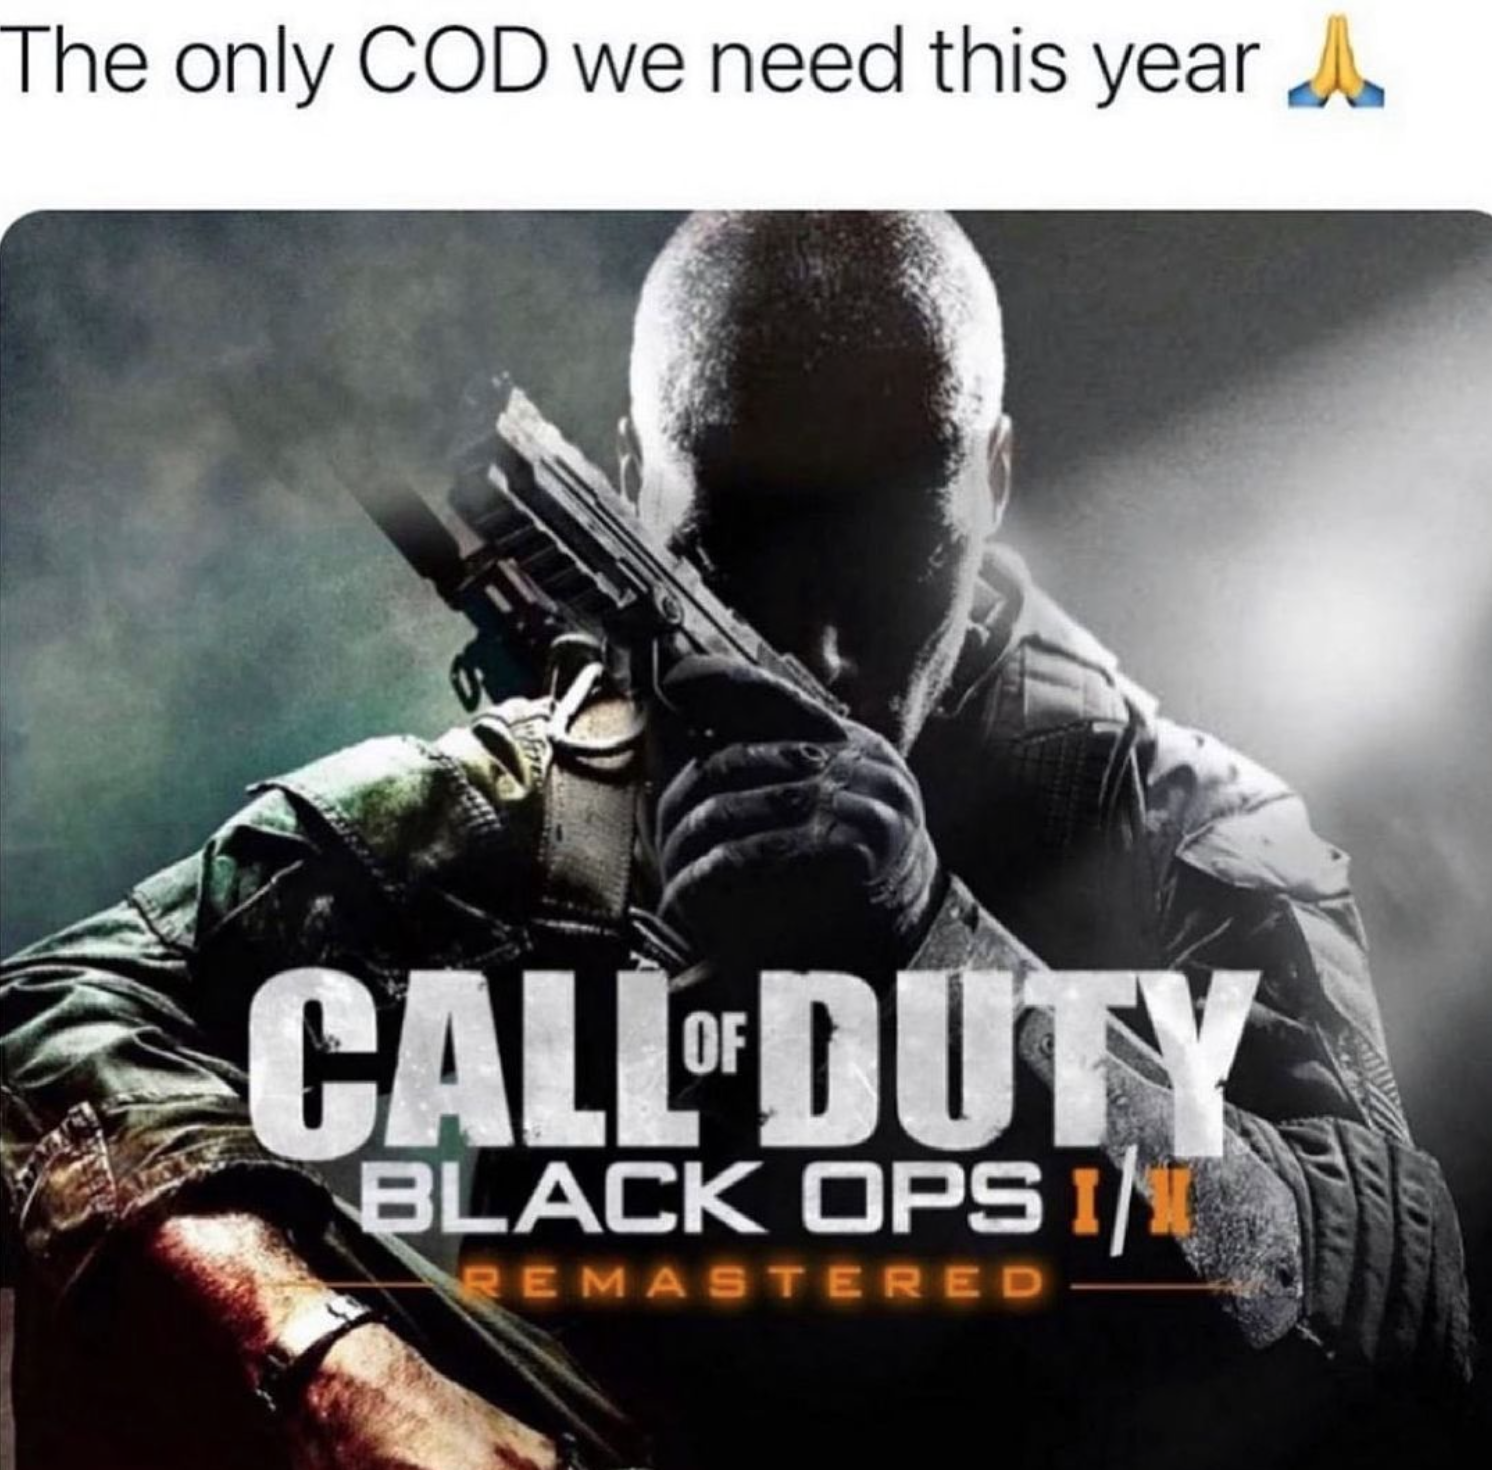 funny gaming memes - soldier - The only Cod we need this year A Call Duty Black Ops In Remastered